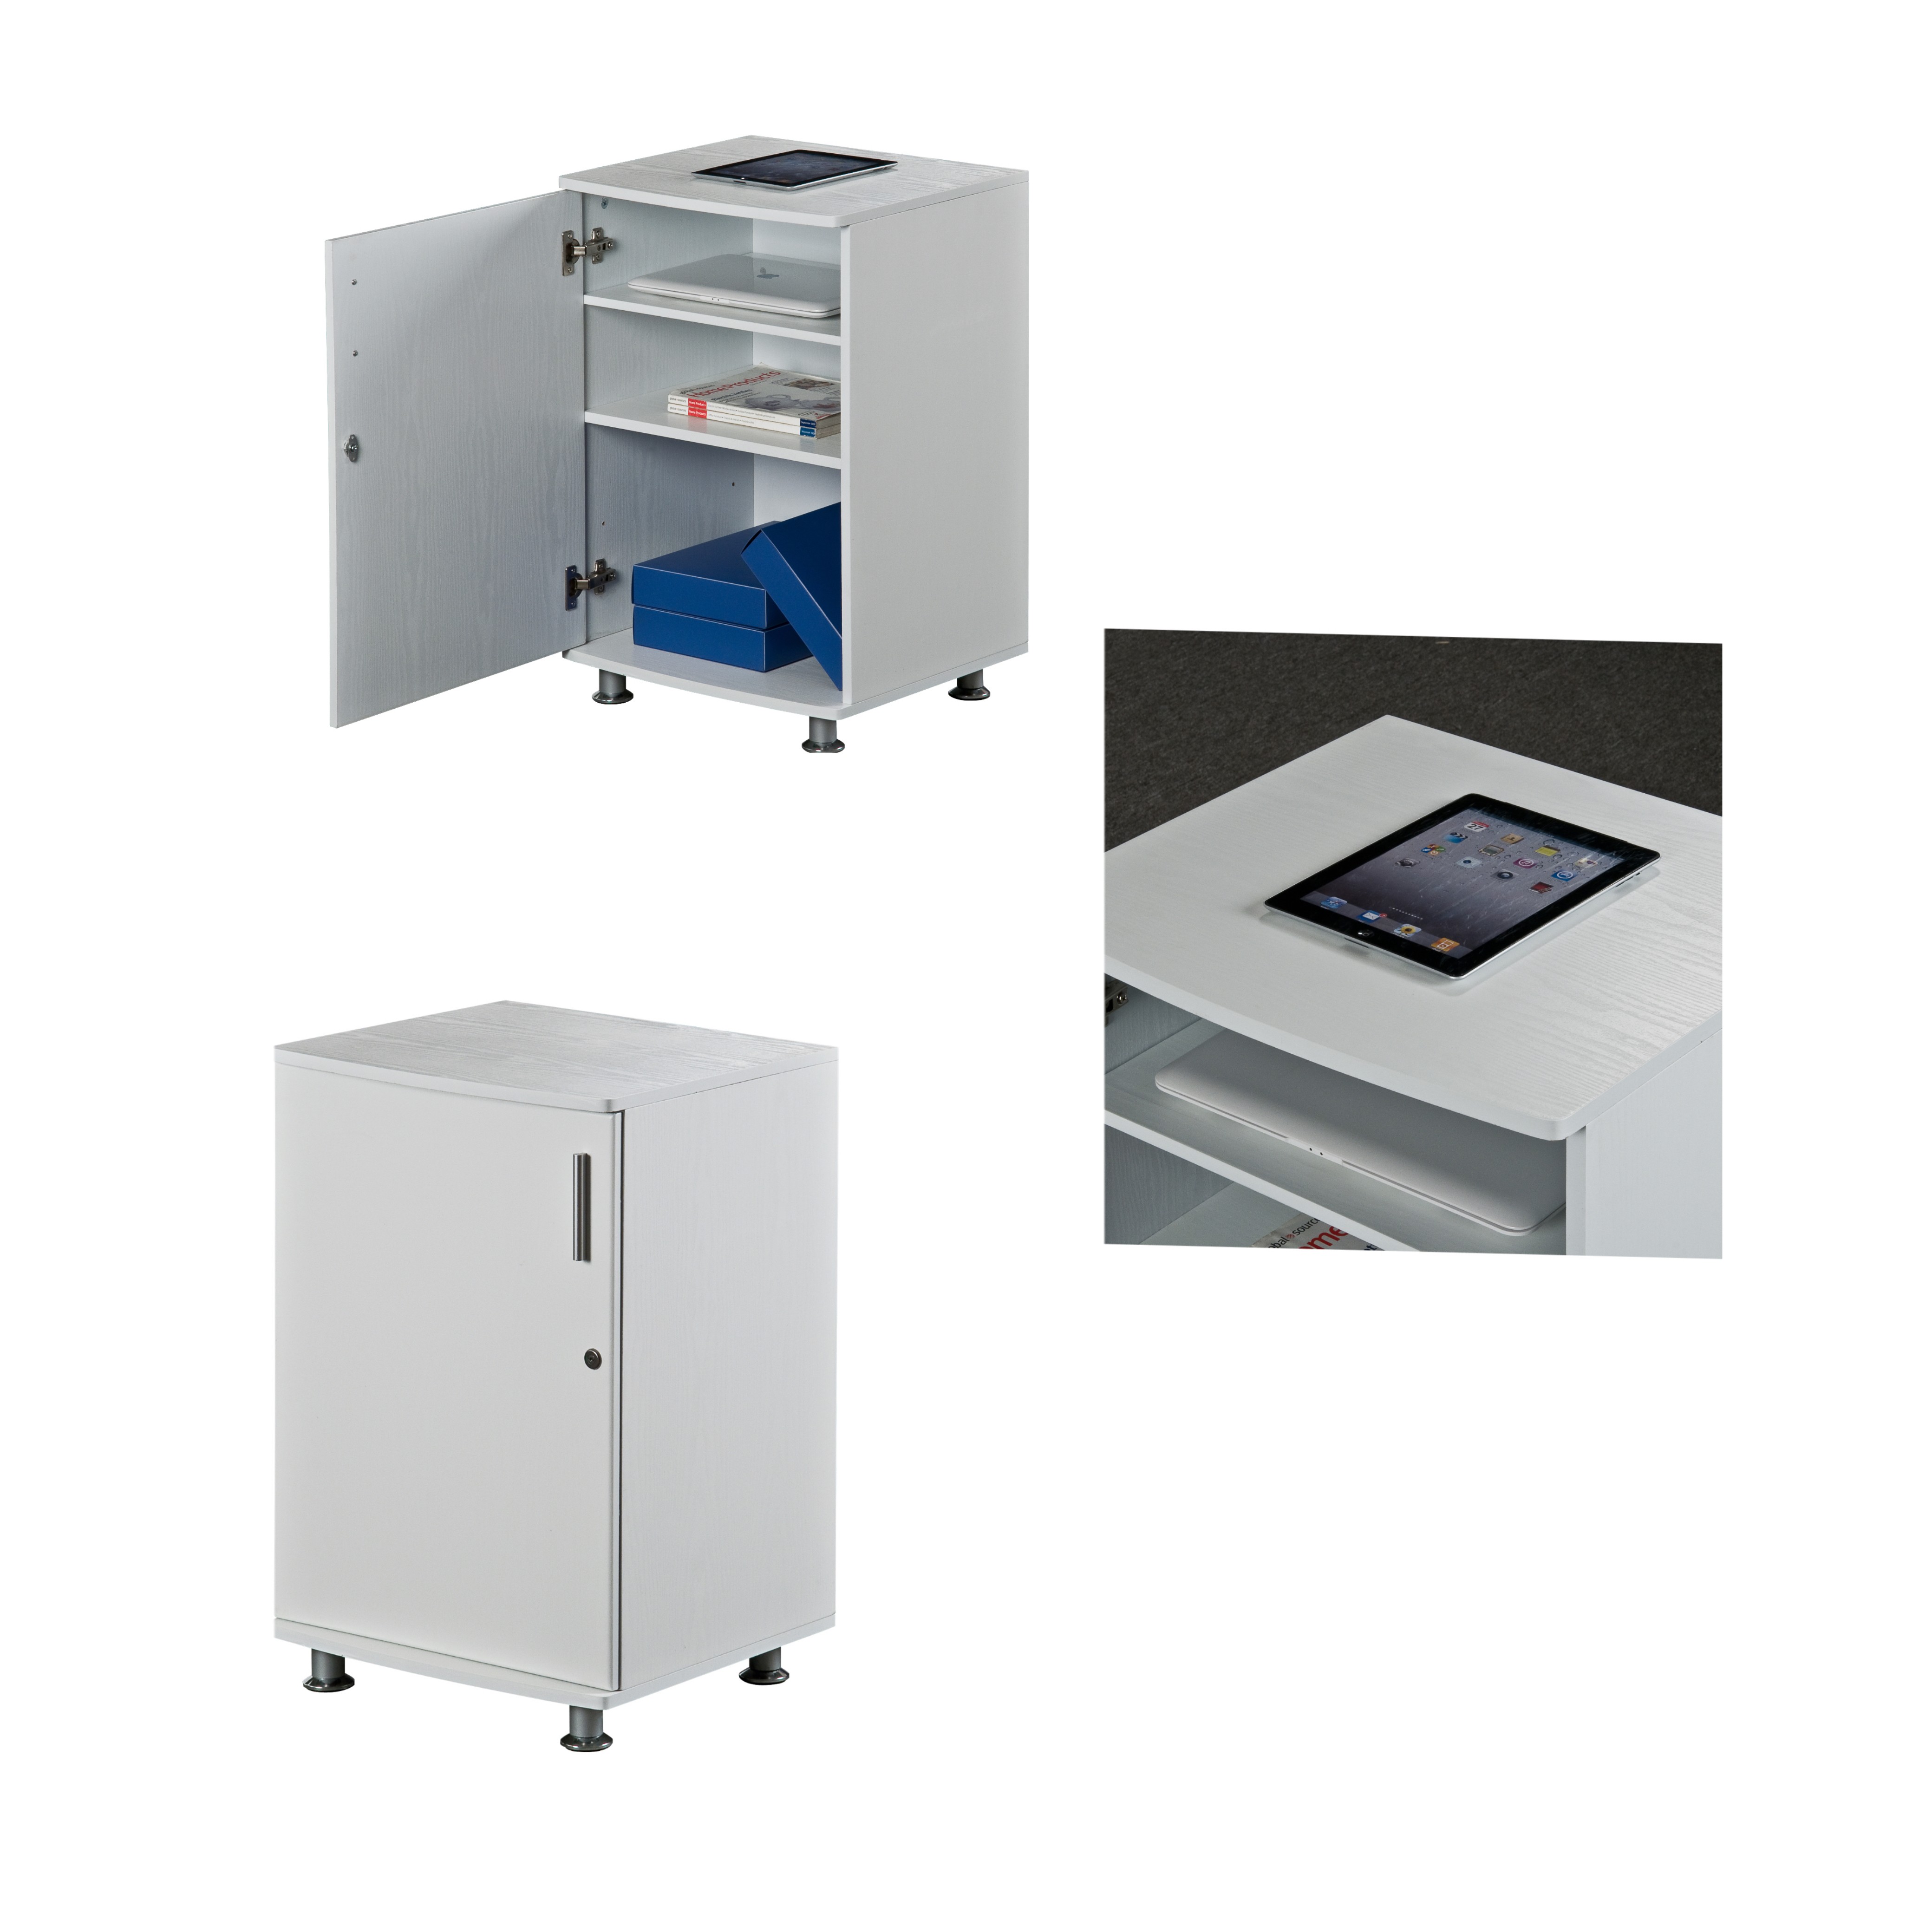 Knock-Down lateral filing cabinet